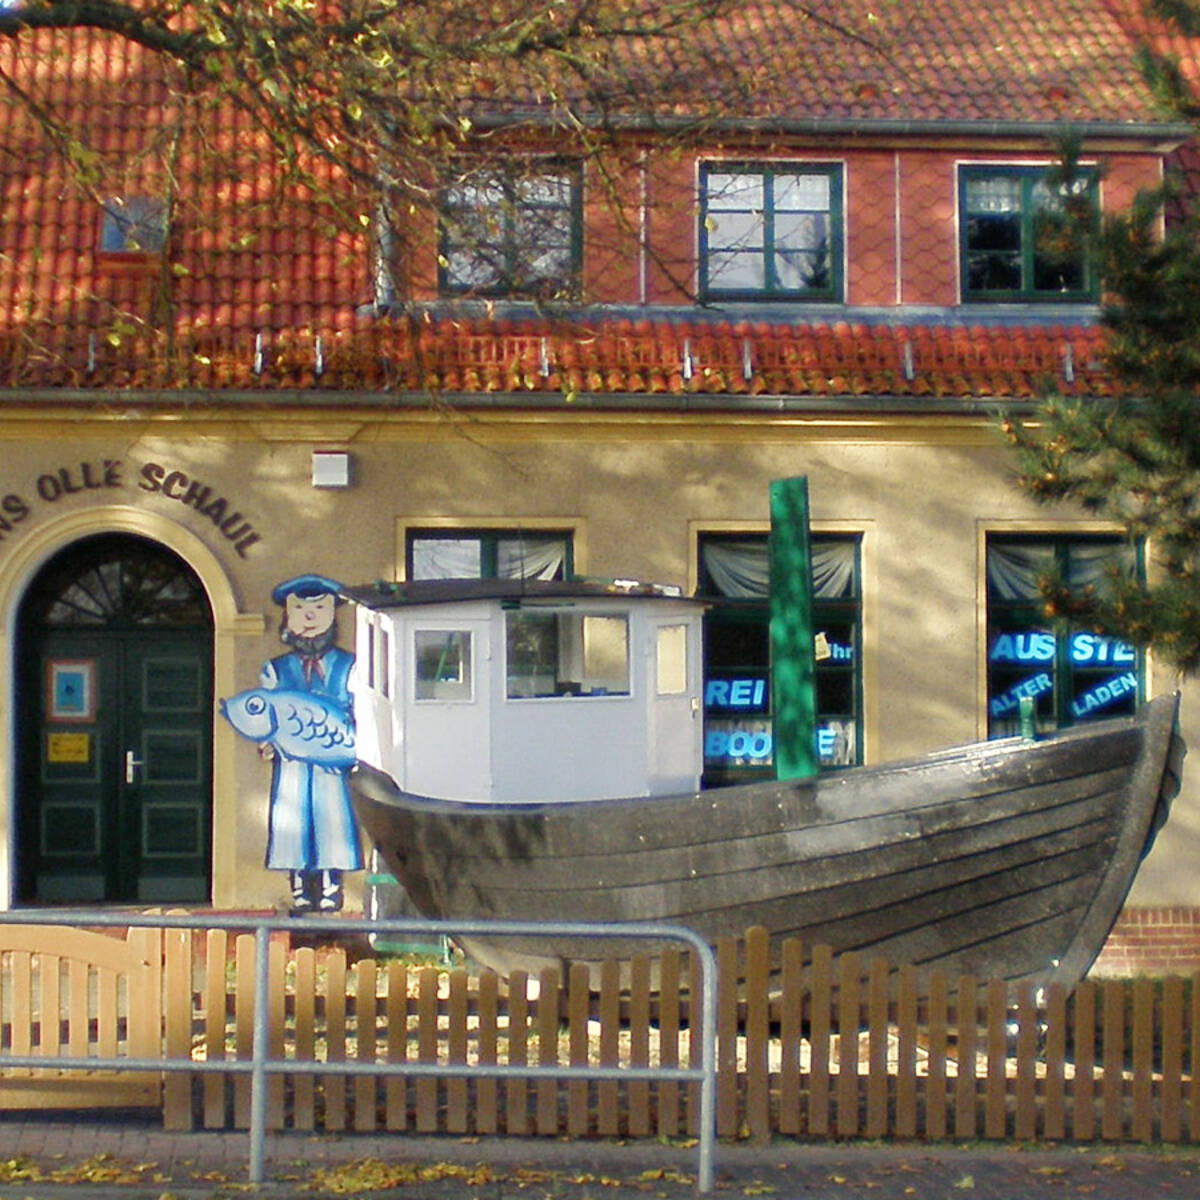 Museen Insel Usedom: Museum "Uns olle Schaul" Zempin